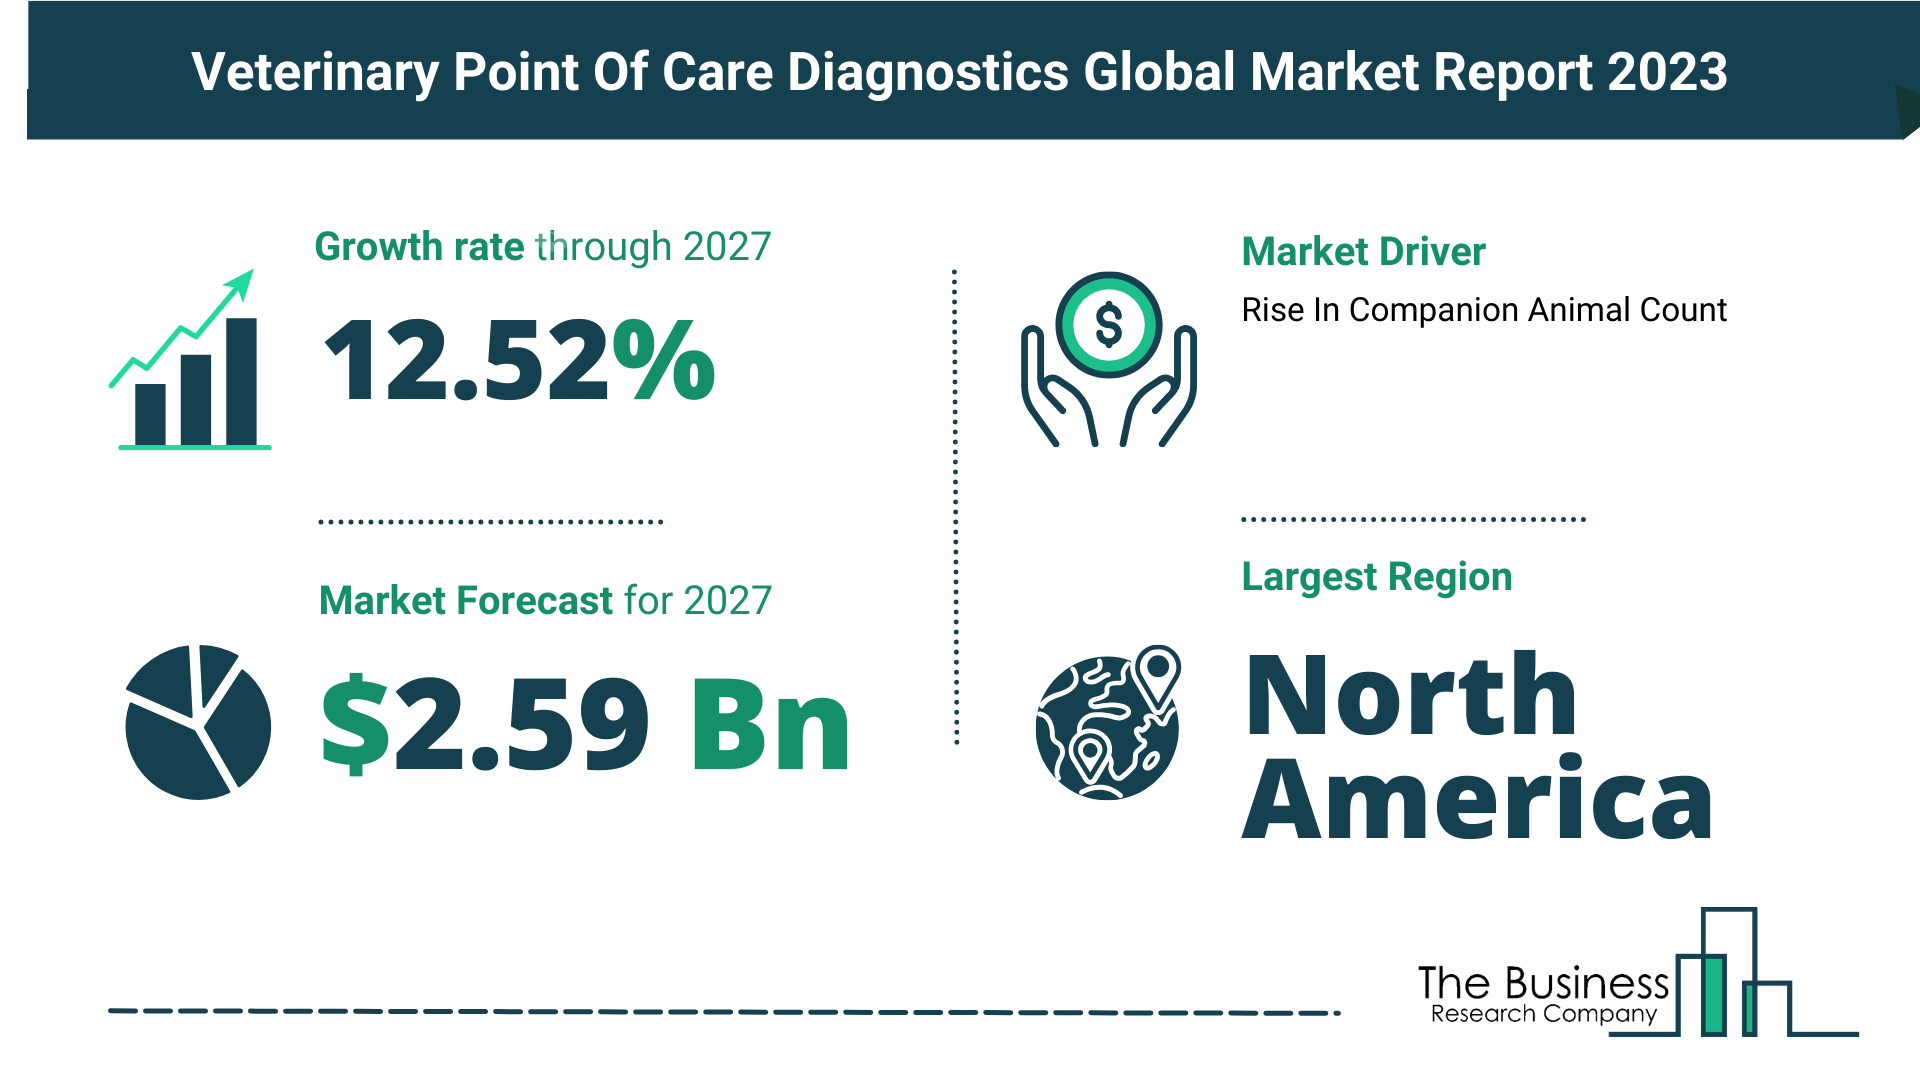 Key Trends And Drivers In The Veterinary Point Of Care Diagnostics Market 2023